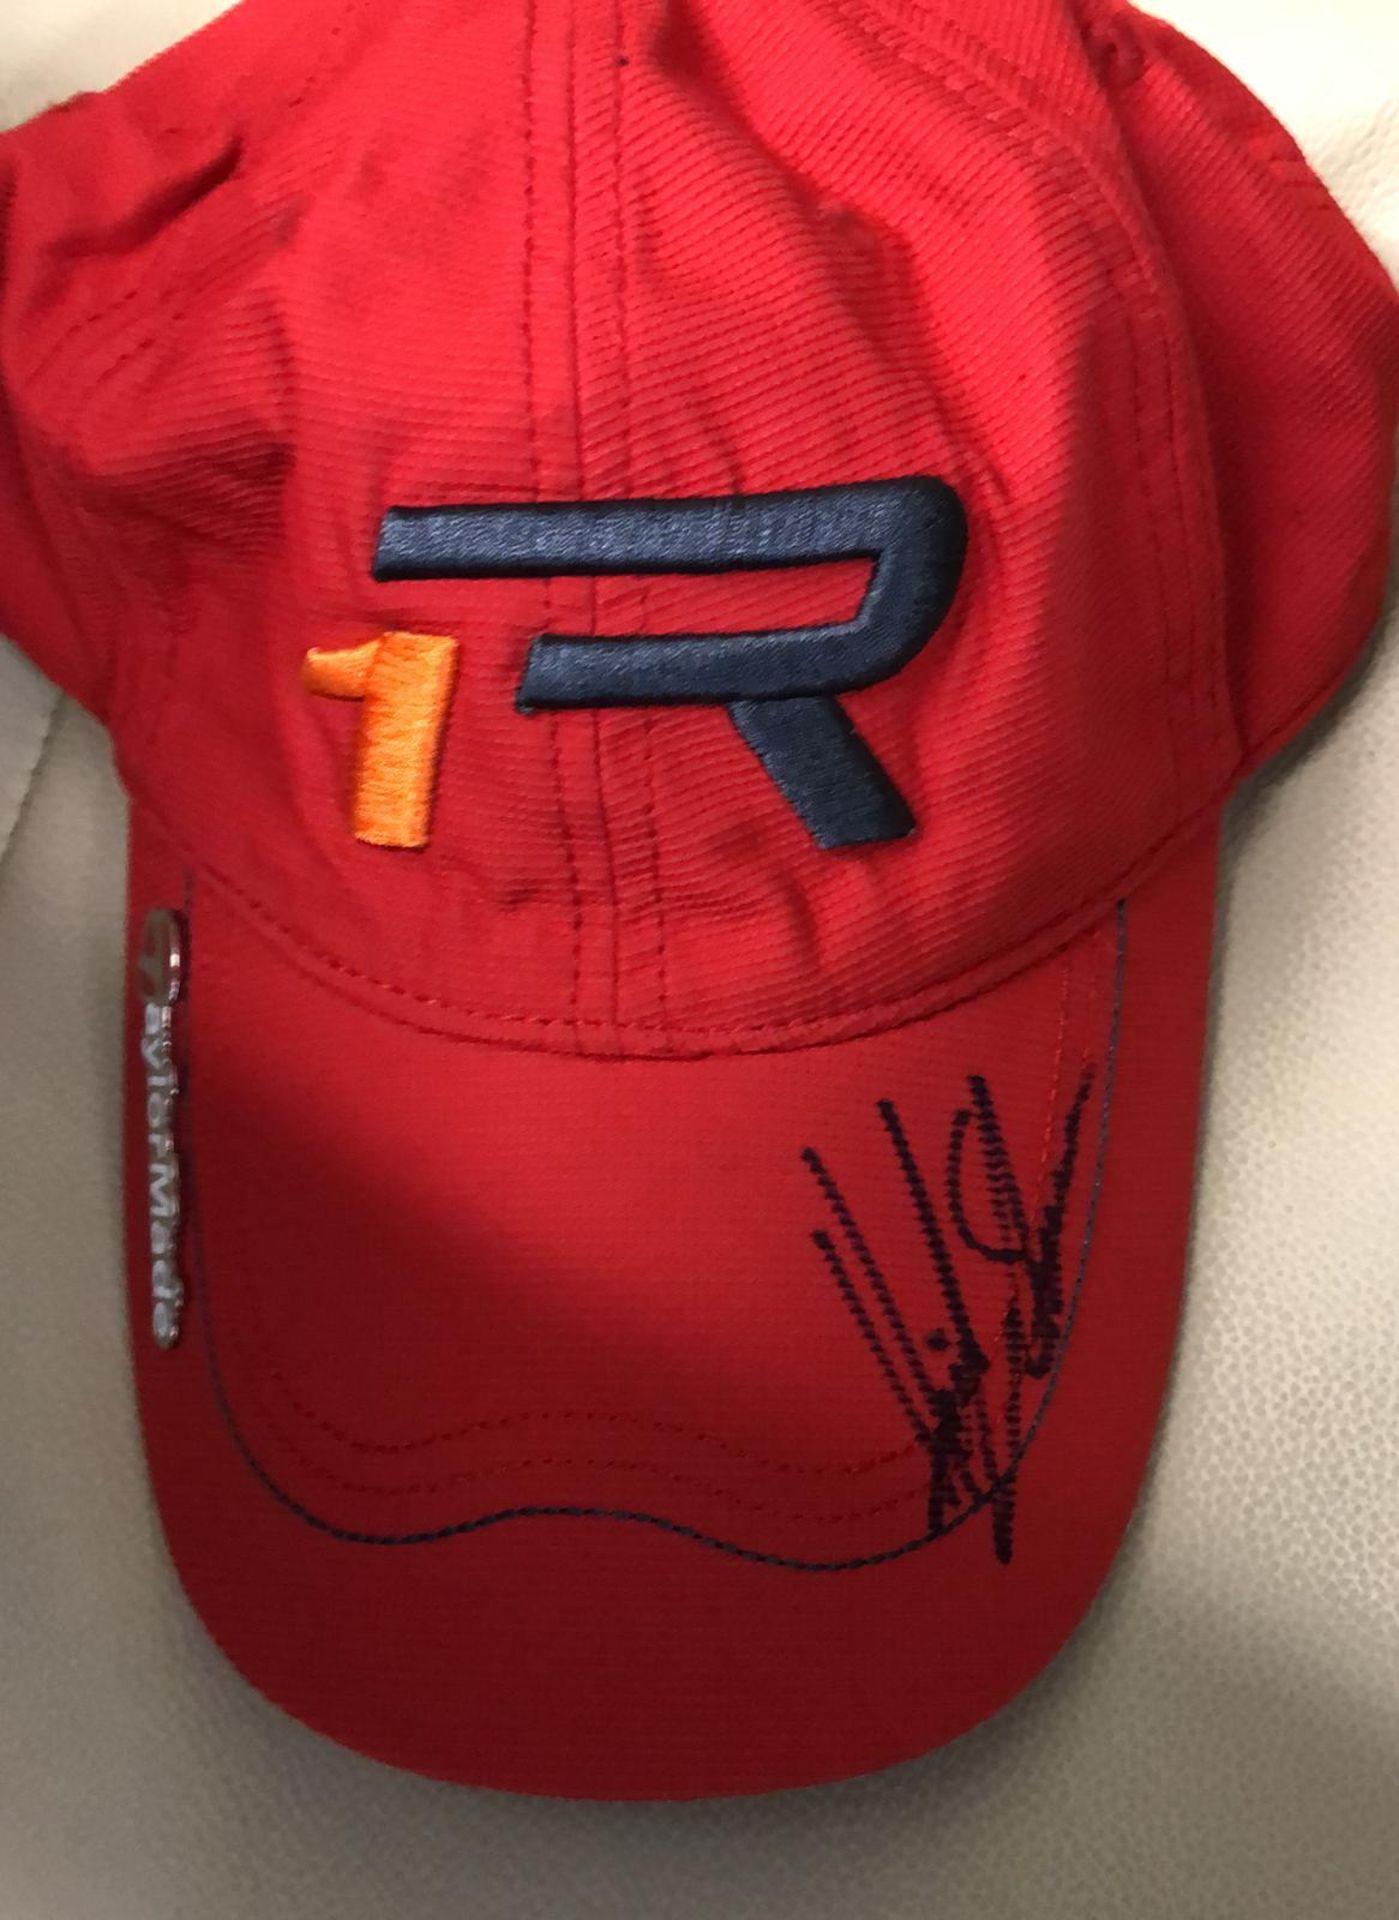 Henrik Stenson Signed Hat With Certificate Of Authenticity